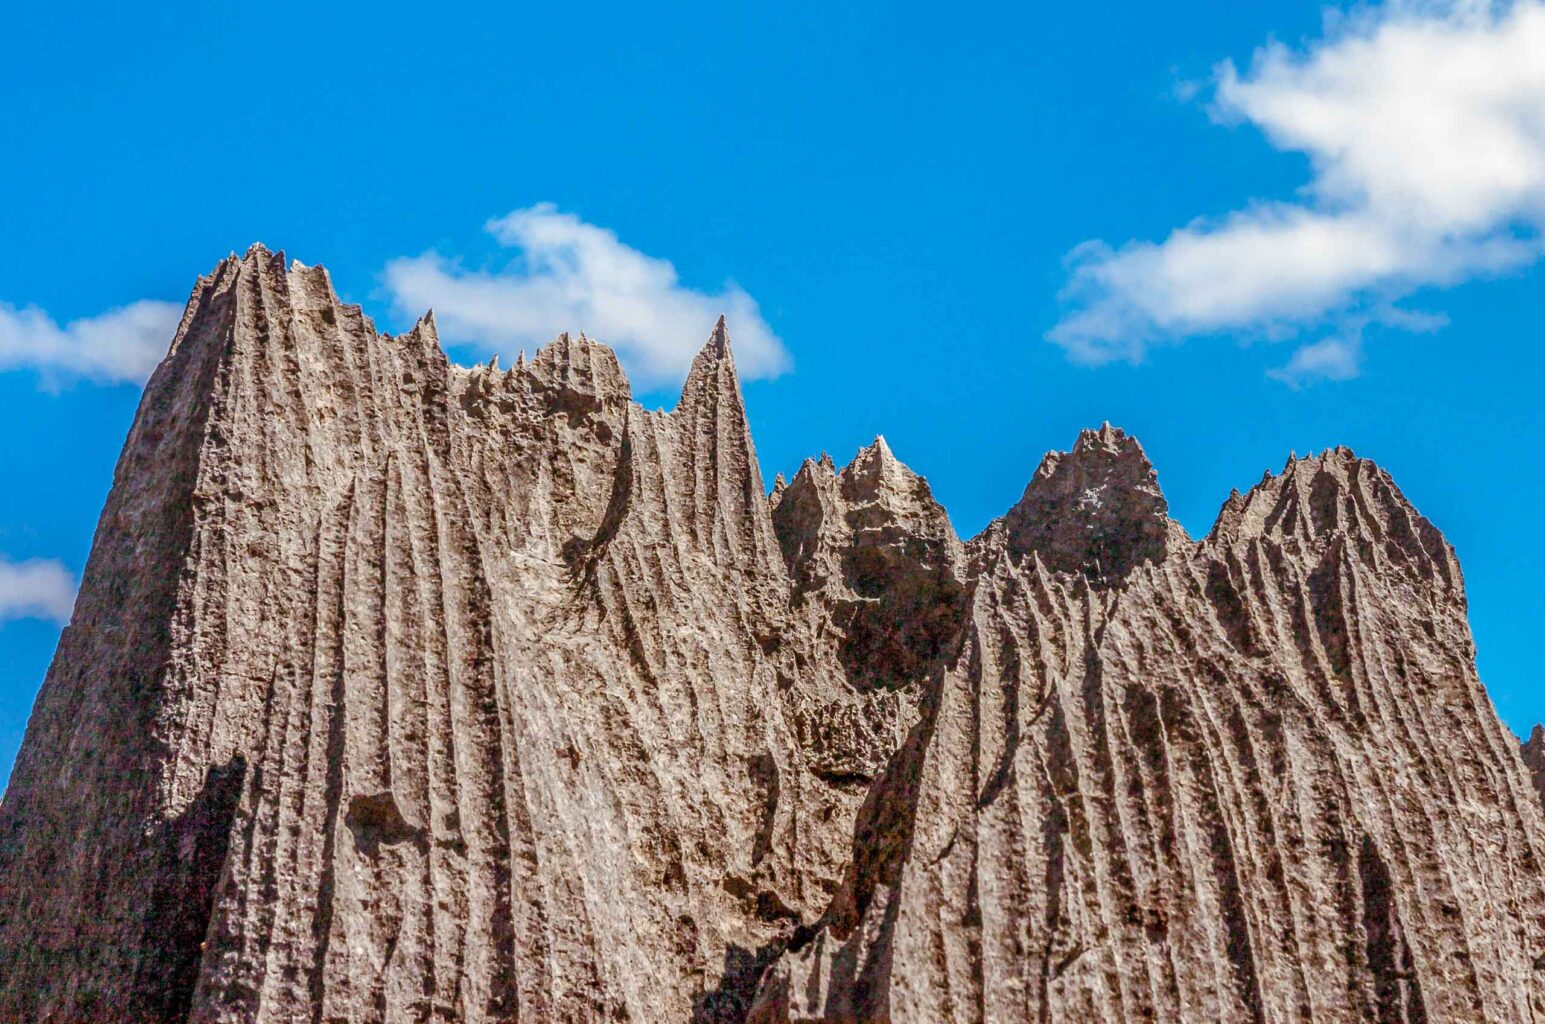 Tsingy limestone pinnacles rise in front of blue sky in Madagascar.